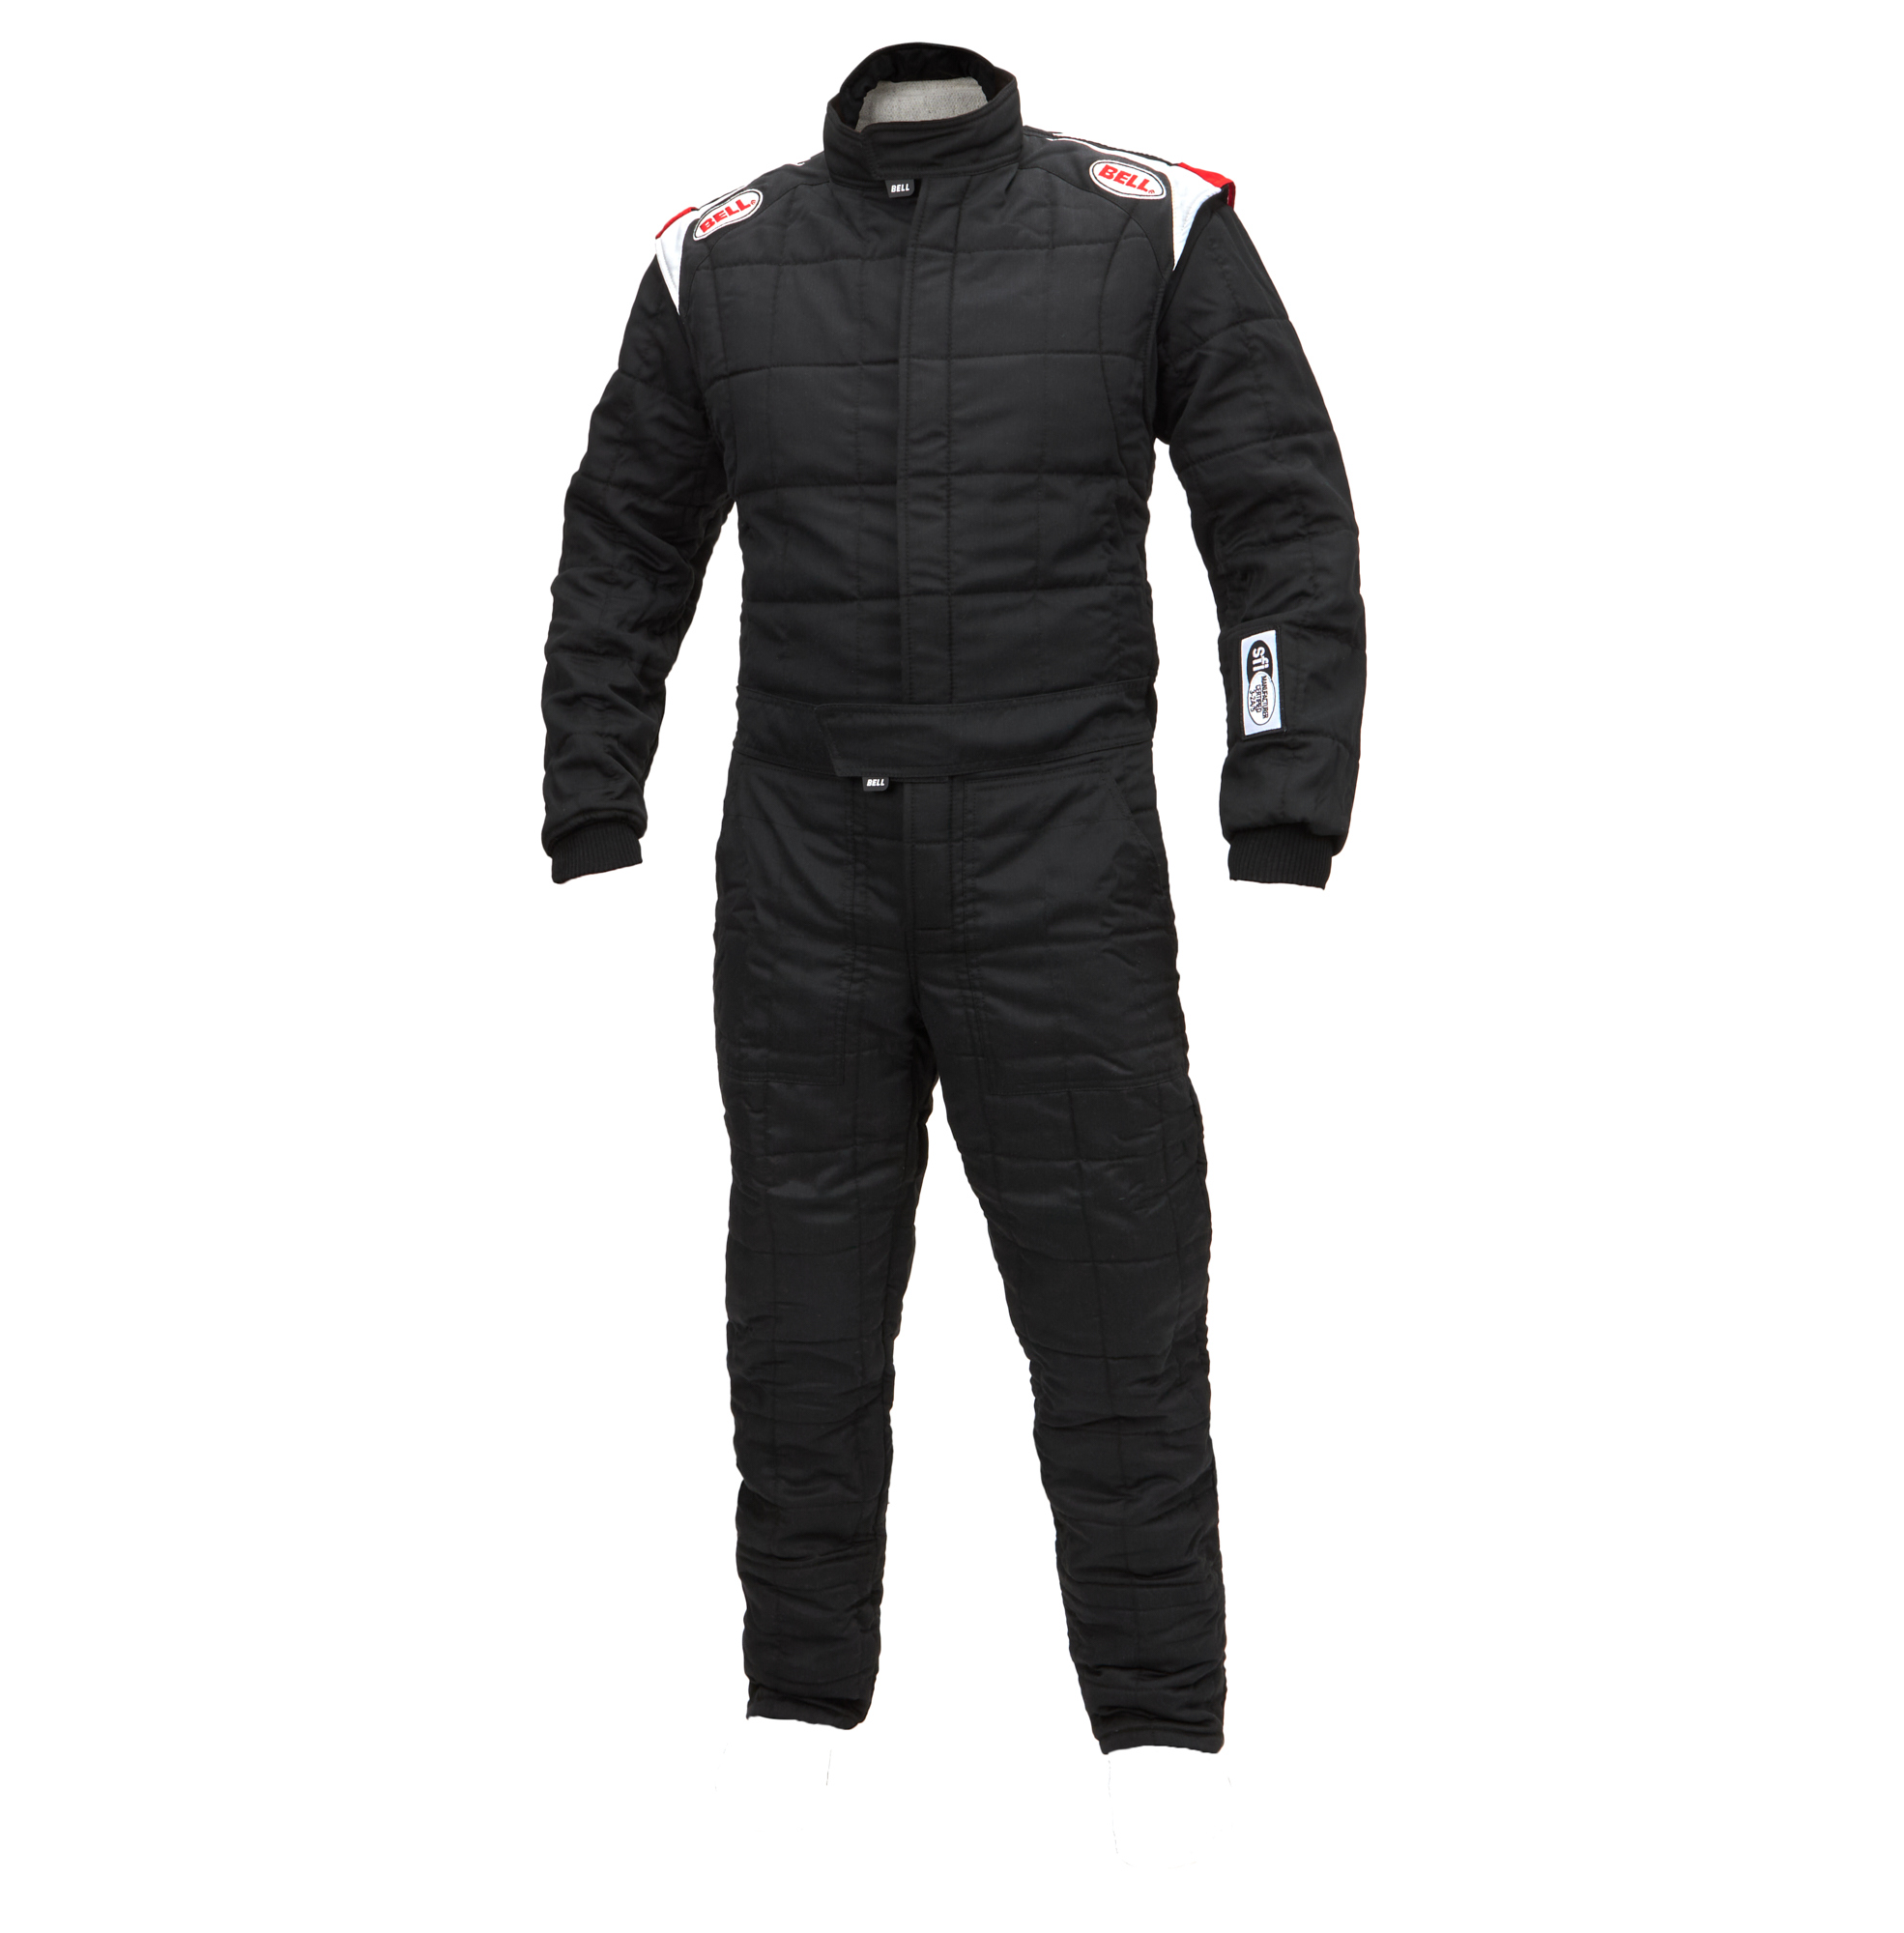 Bell Sport-TX Suit Black Small (46-48) SFI 3.2A/5 - BR10061